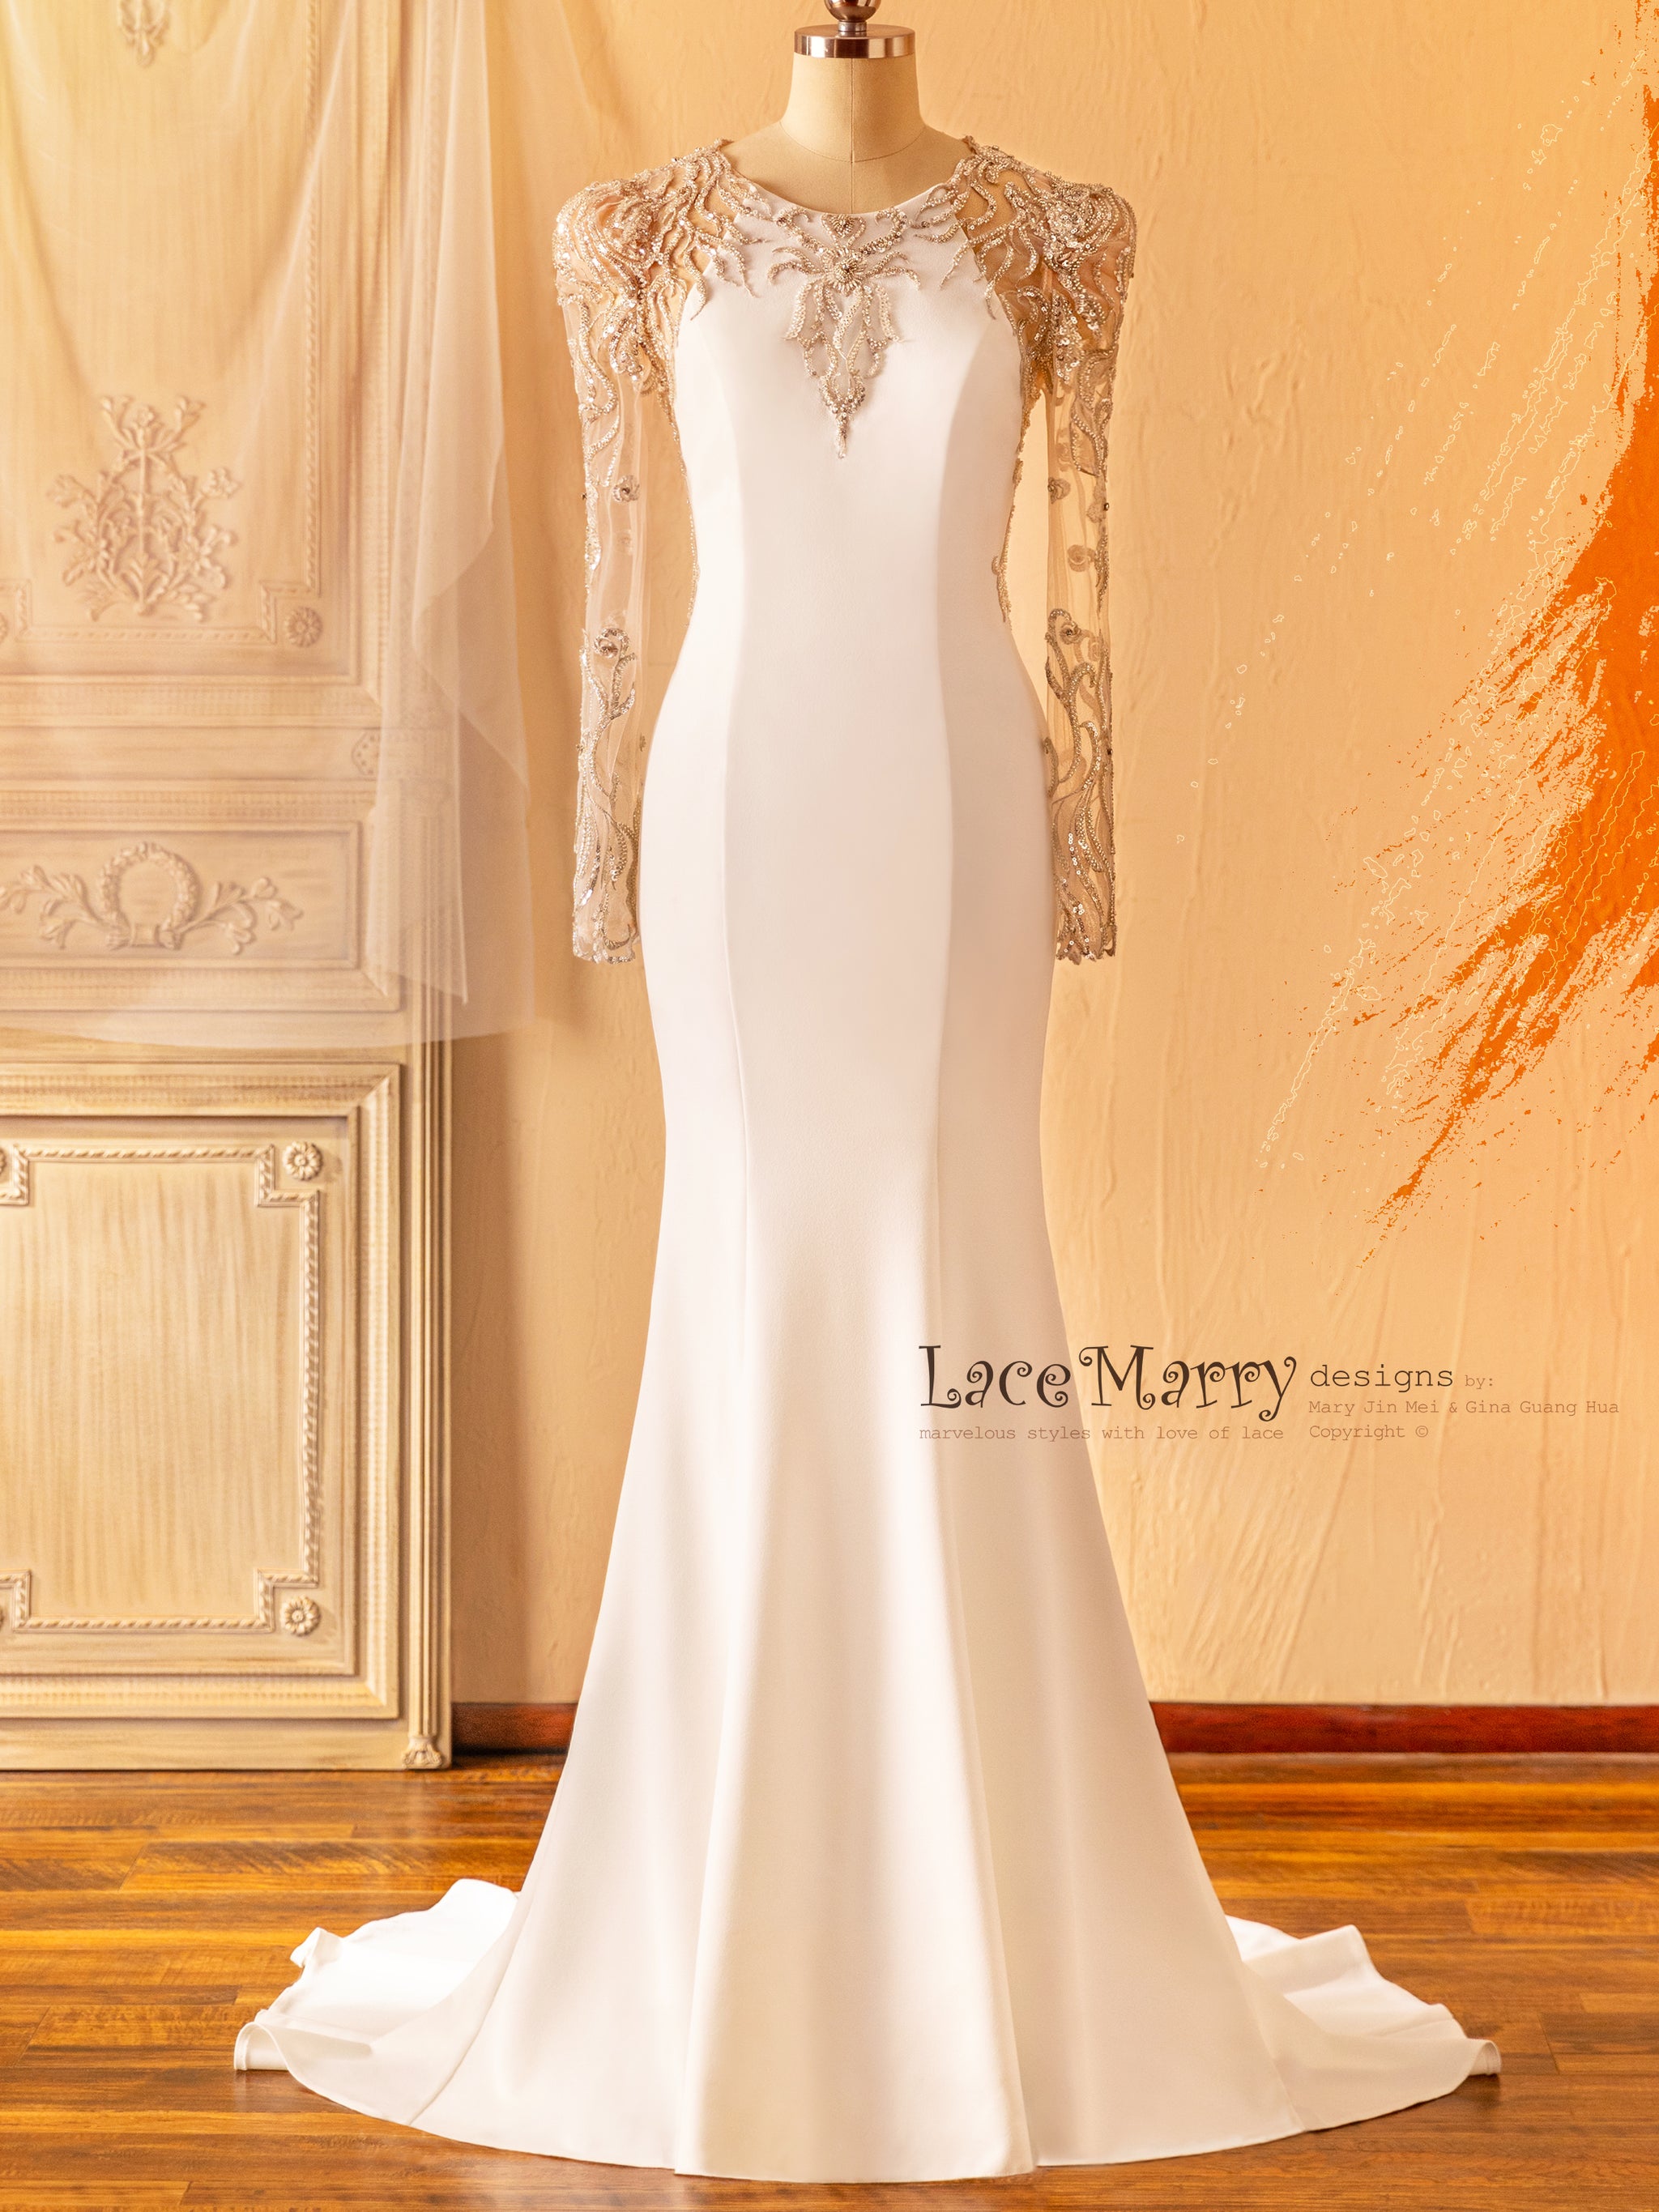 ANZU / Sophisticated Fitted Wedding Dress with Puff Shoulder Sleeves -  LaceMarry